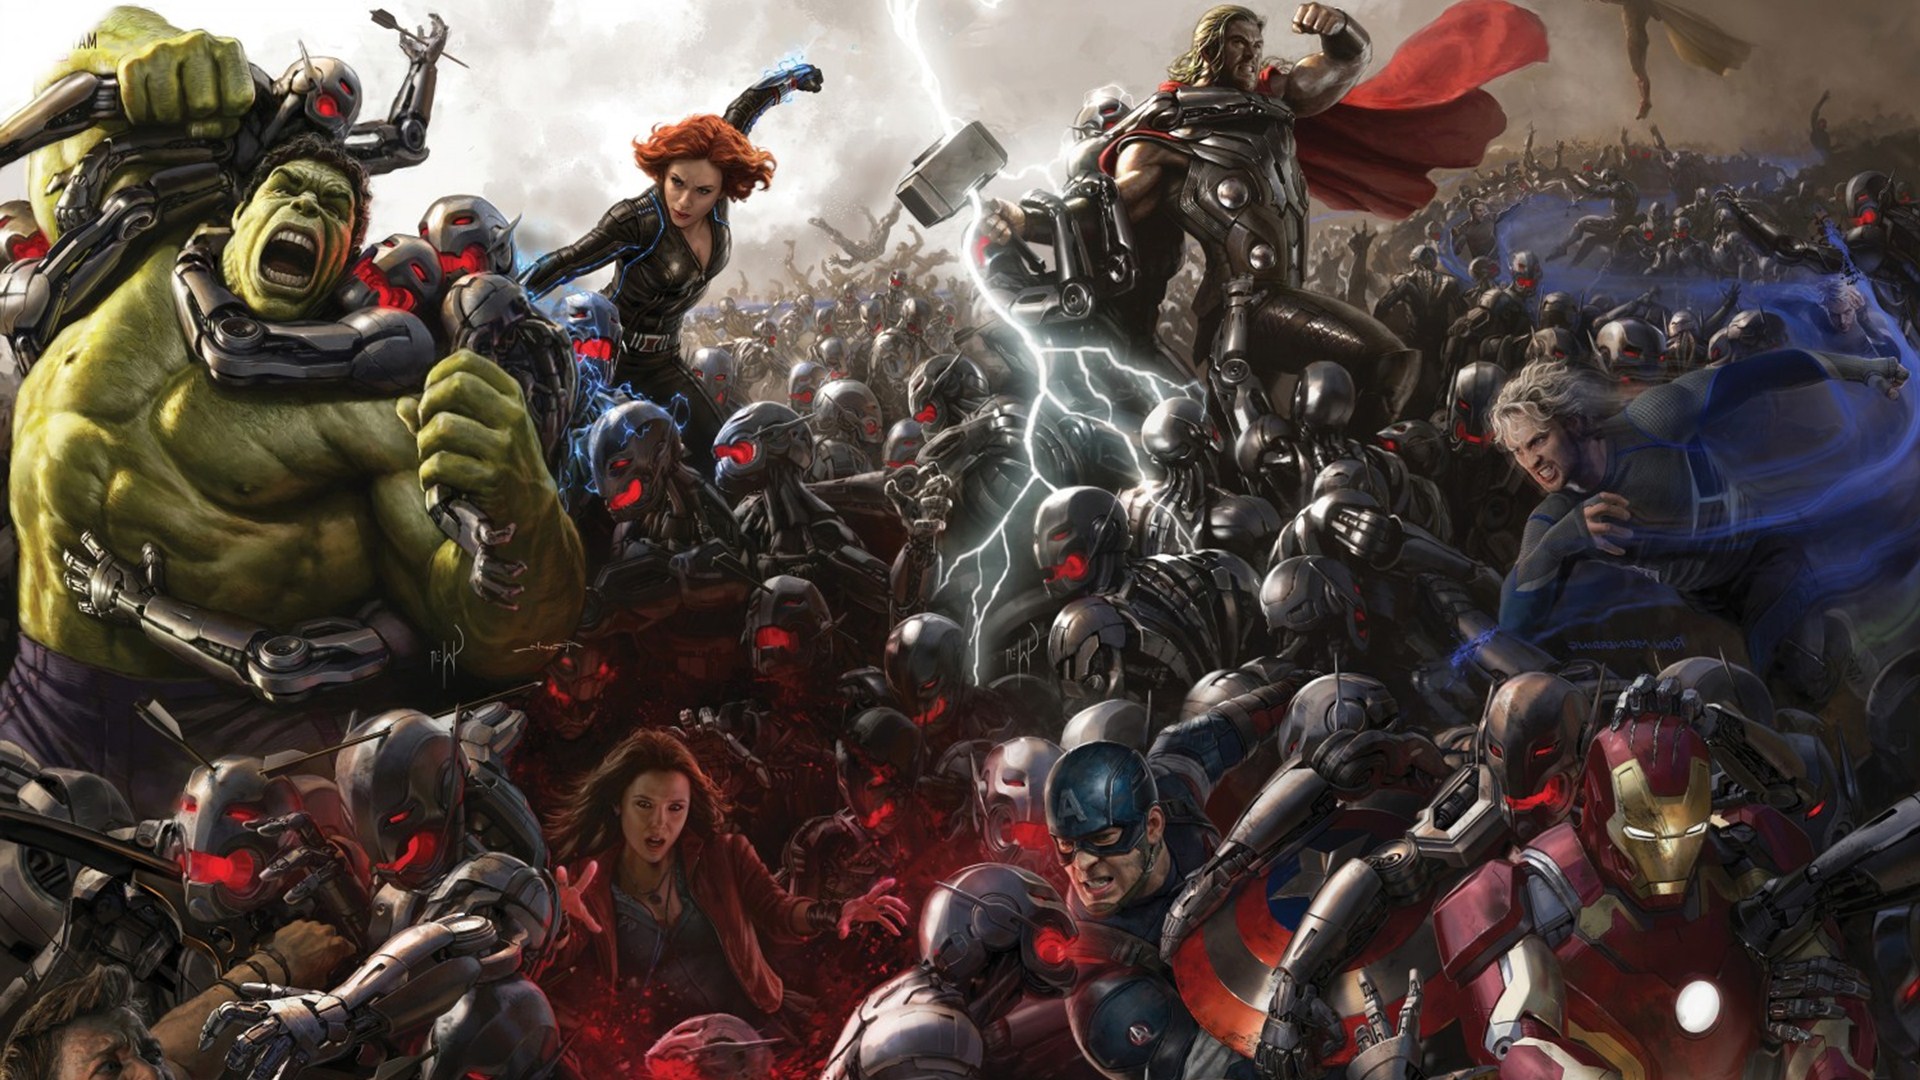 age of ultron download